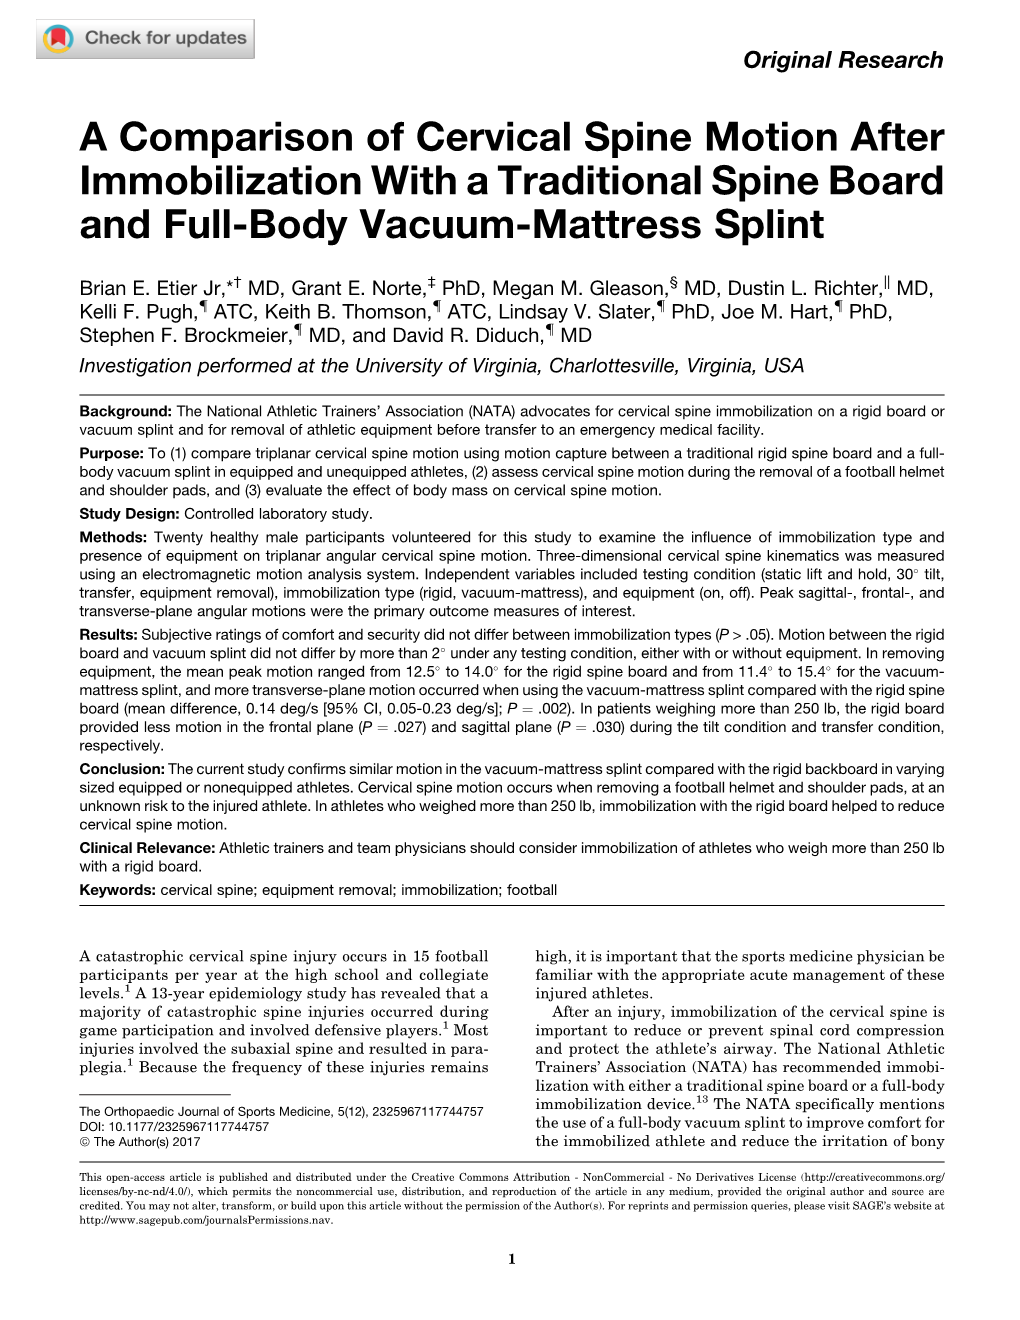 A Comparison of Cervical Spine Motion After Immobilization with a Traditional Spine Board and Full-Body Vacuum-Mattress Splint